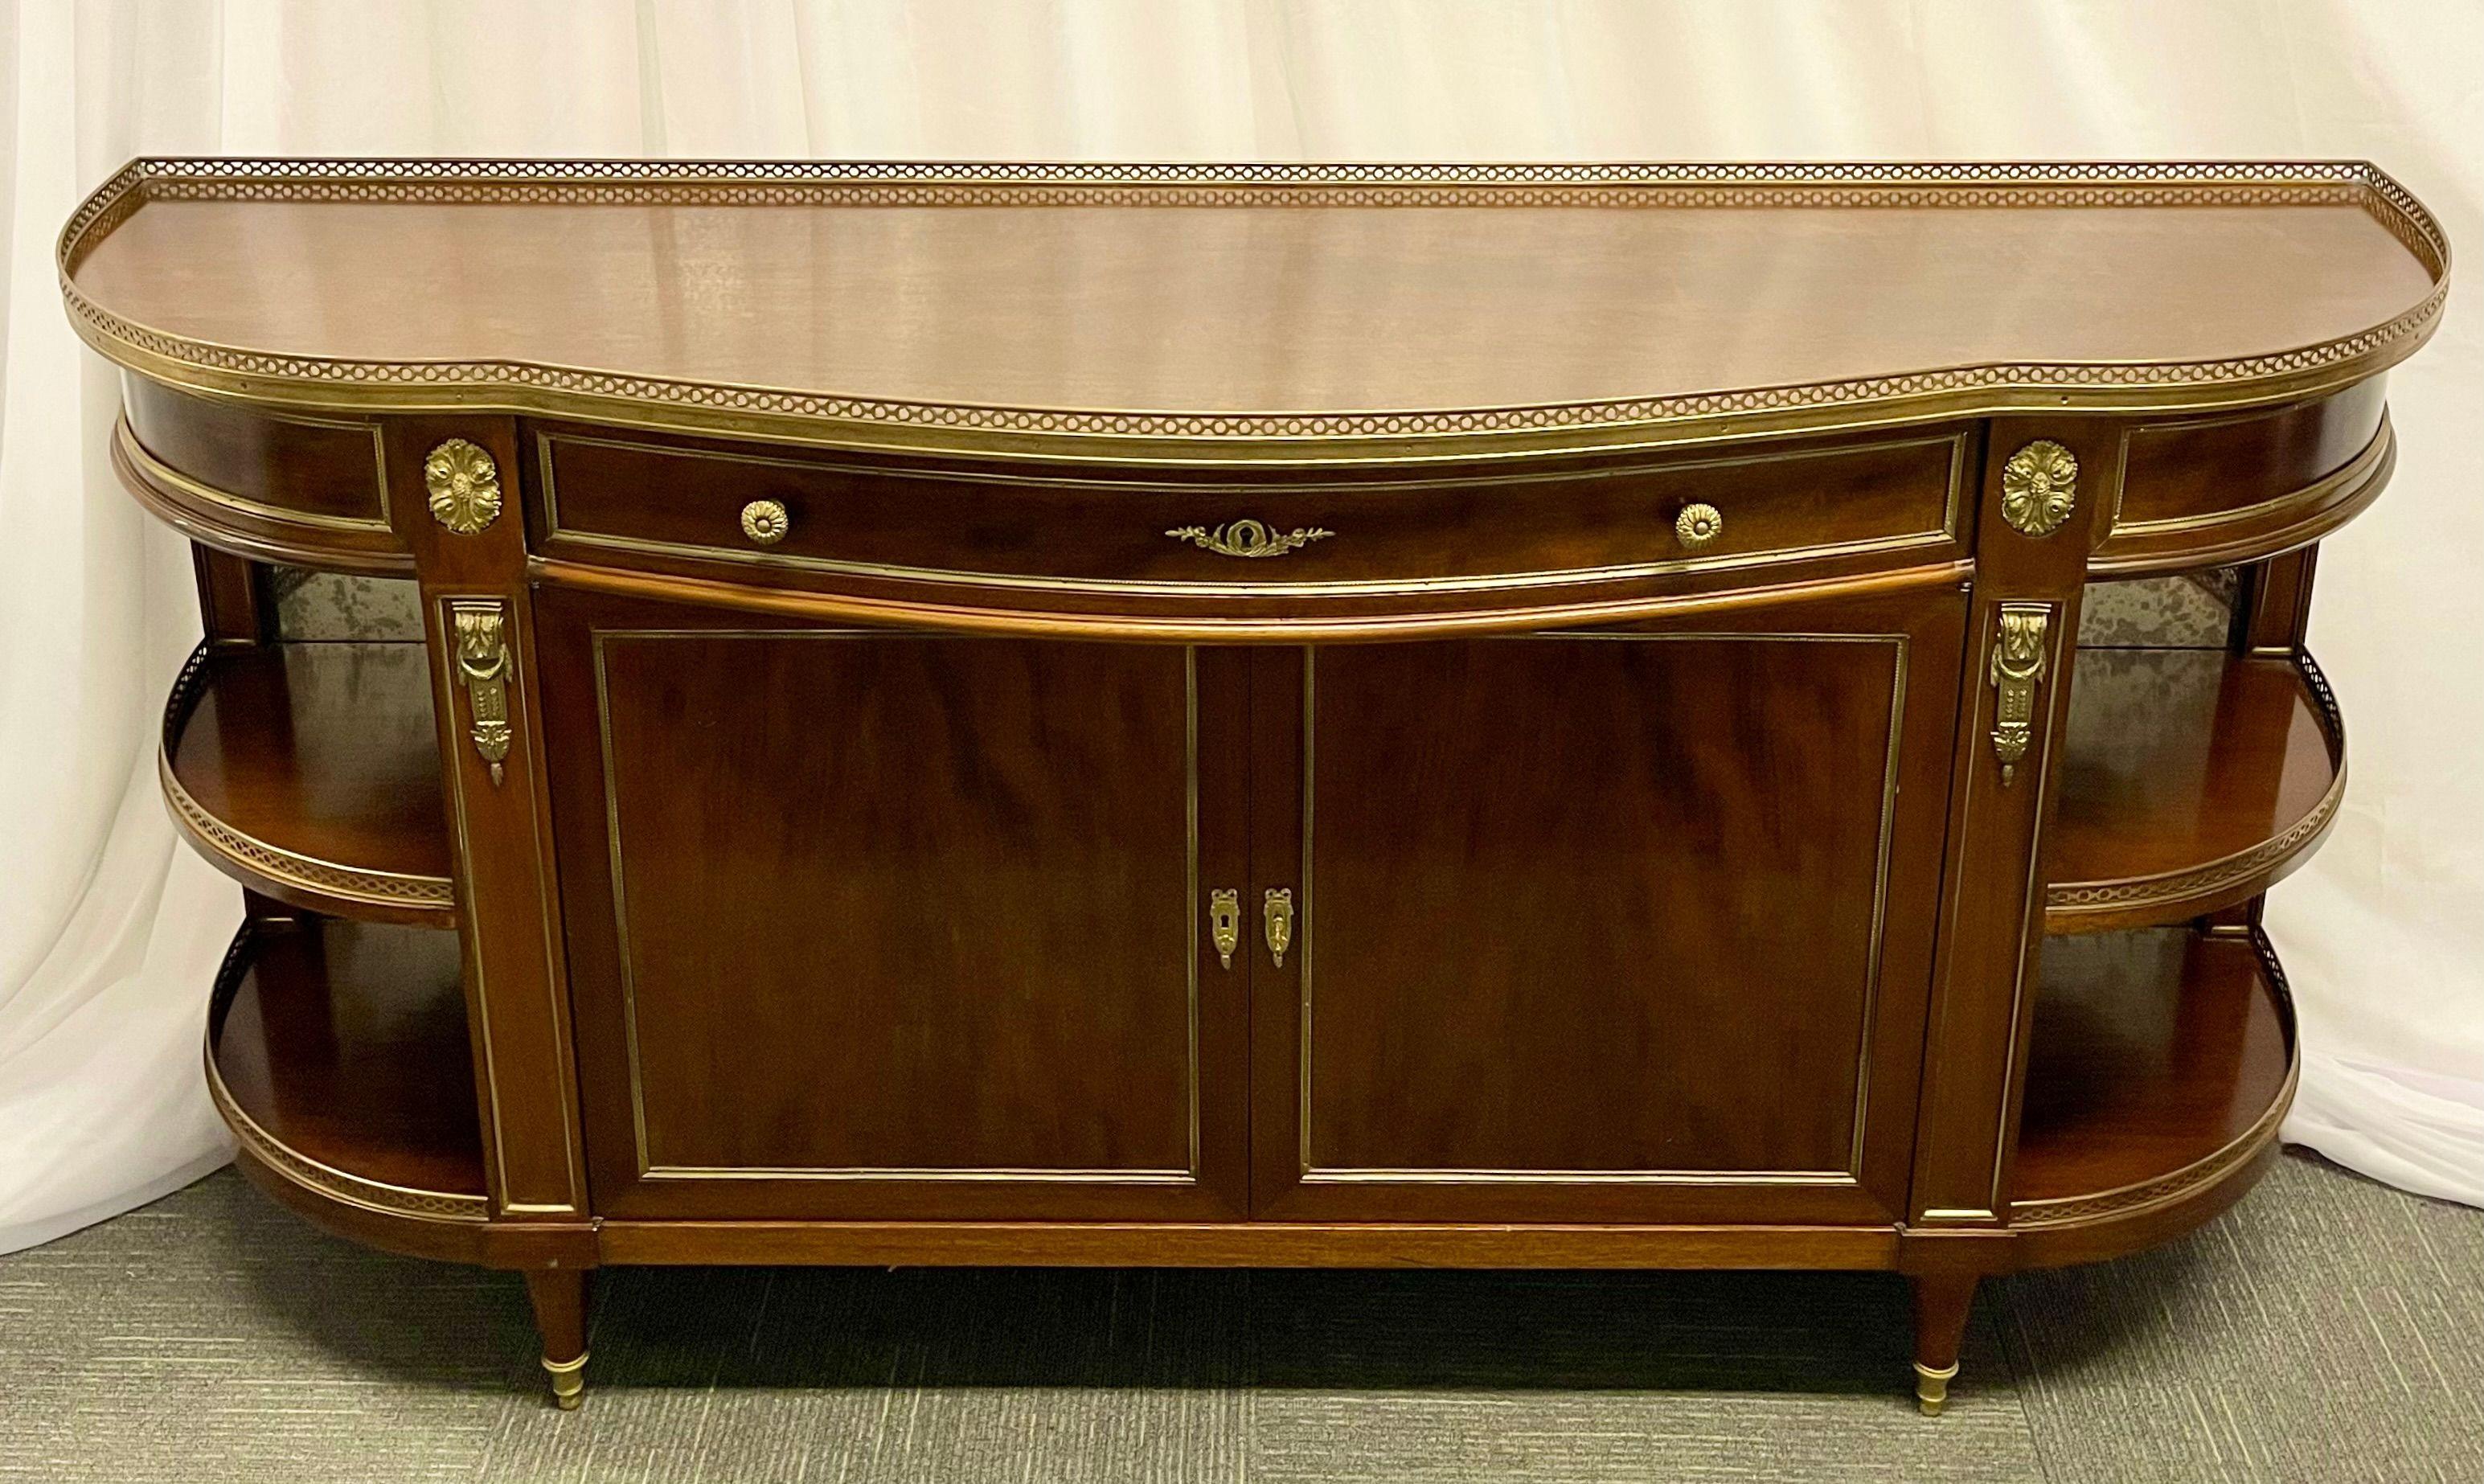 This is a fine attributed Maison Jansen flame mahogany neoclassical server sideboard having a demilune Front. This wonderfully bronze-mounted server or console is a Fine example of this highly acclaimed designers work and dedication to quality. The